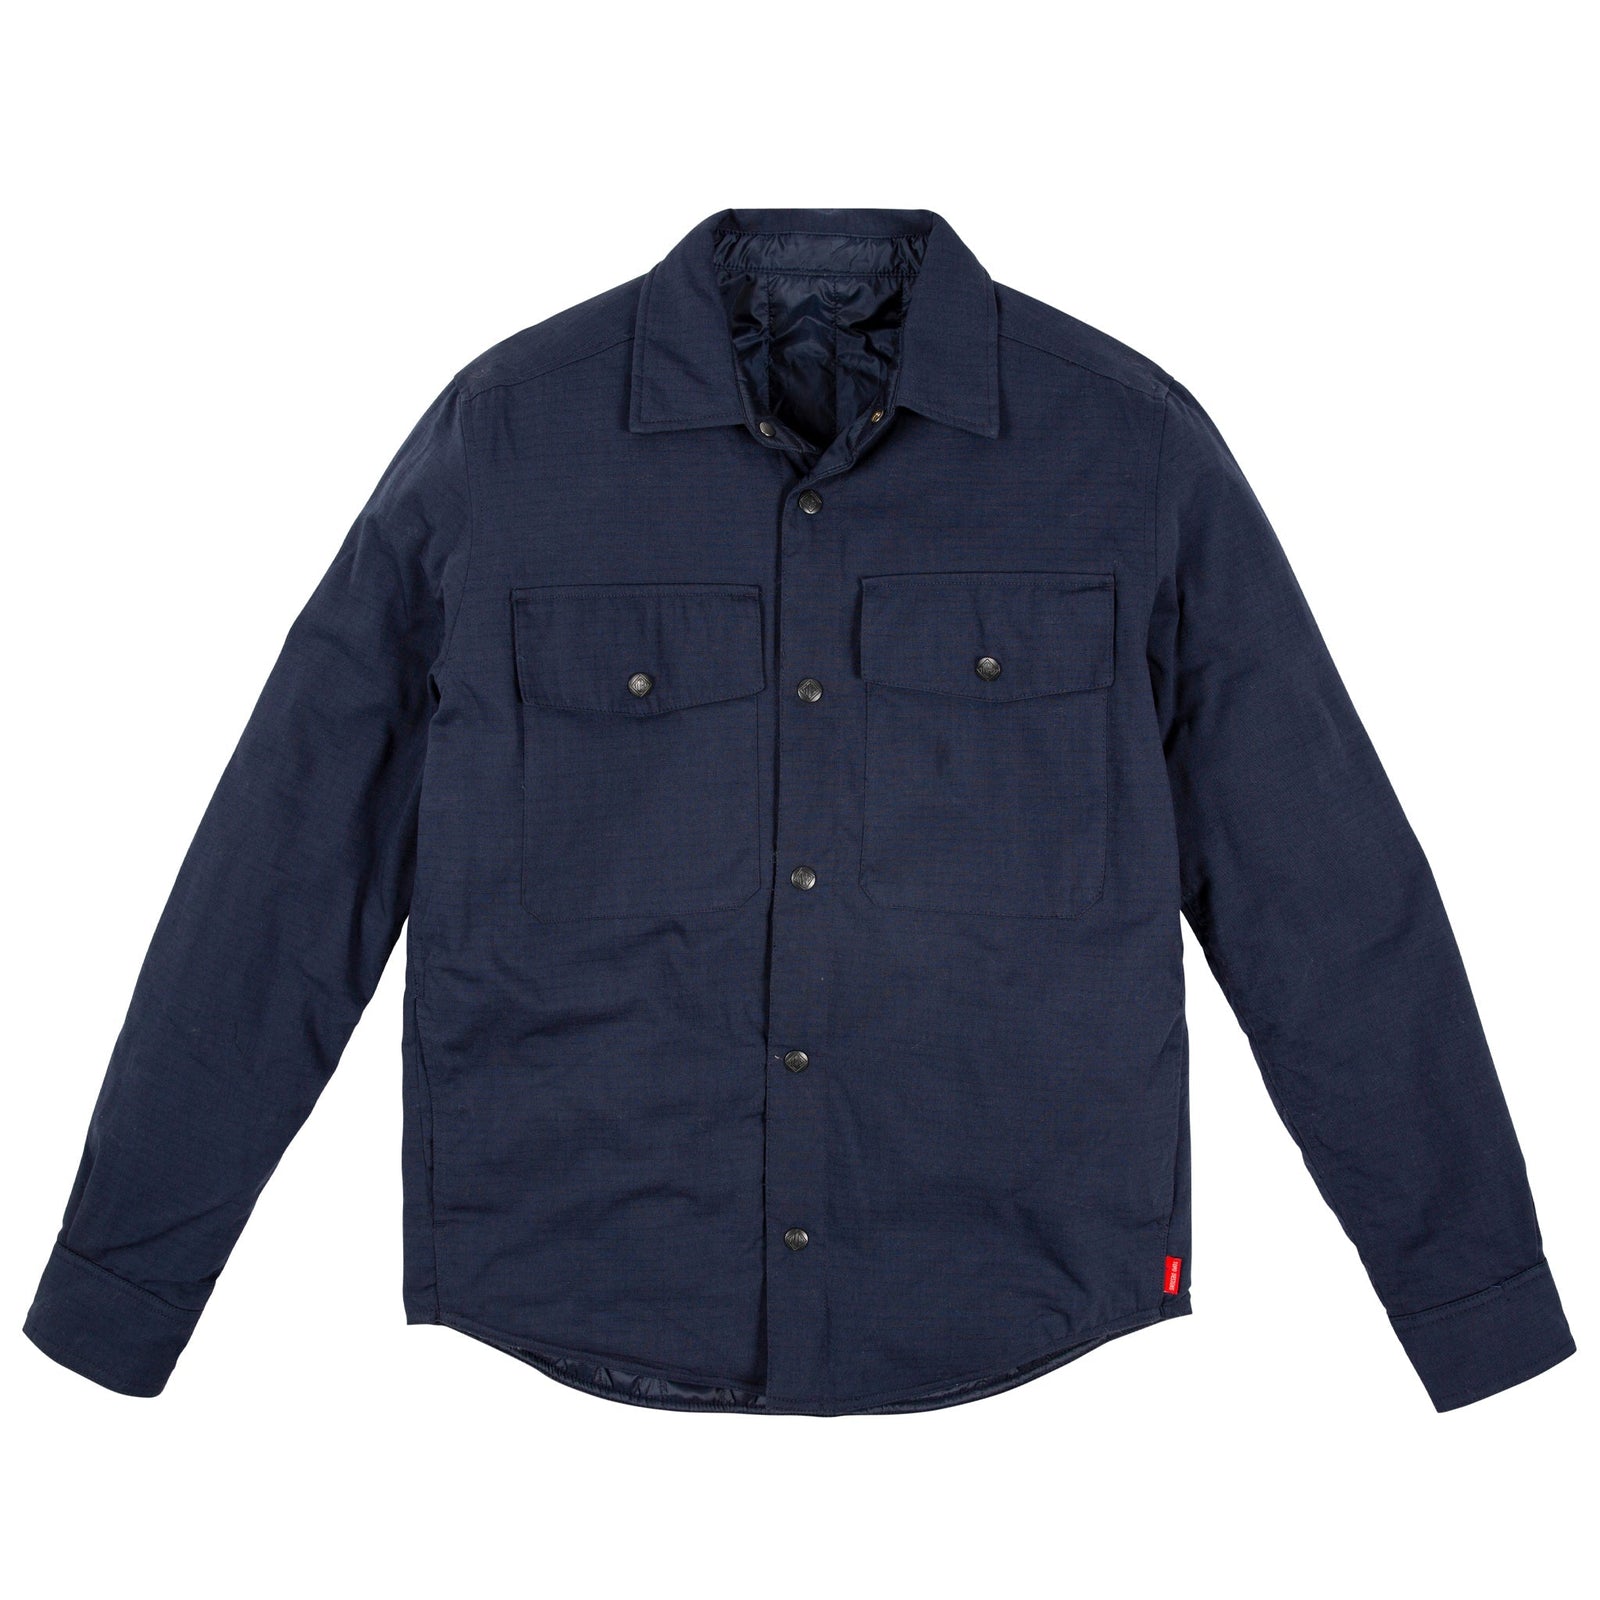 Topo Designs Men's Insulated Reversible Shirt Jacket in "Navy" blue.